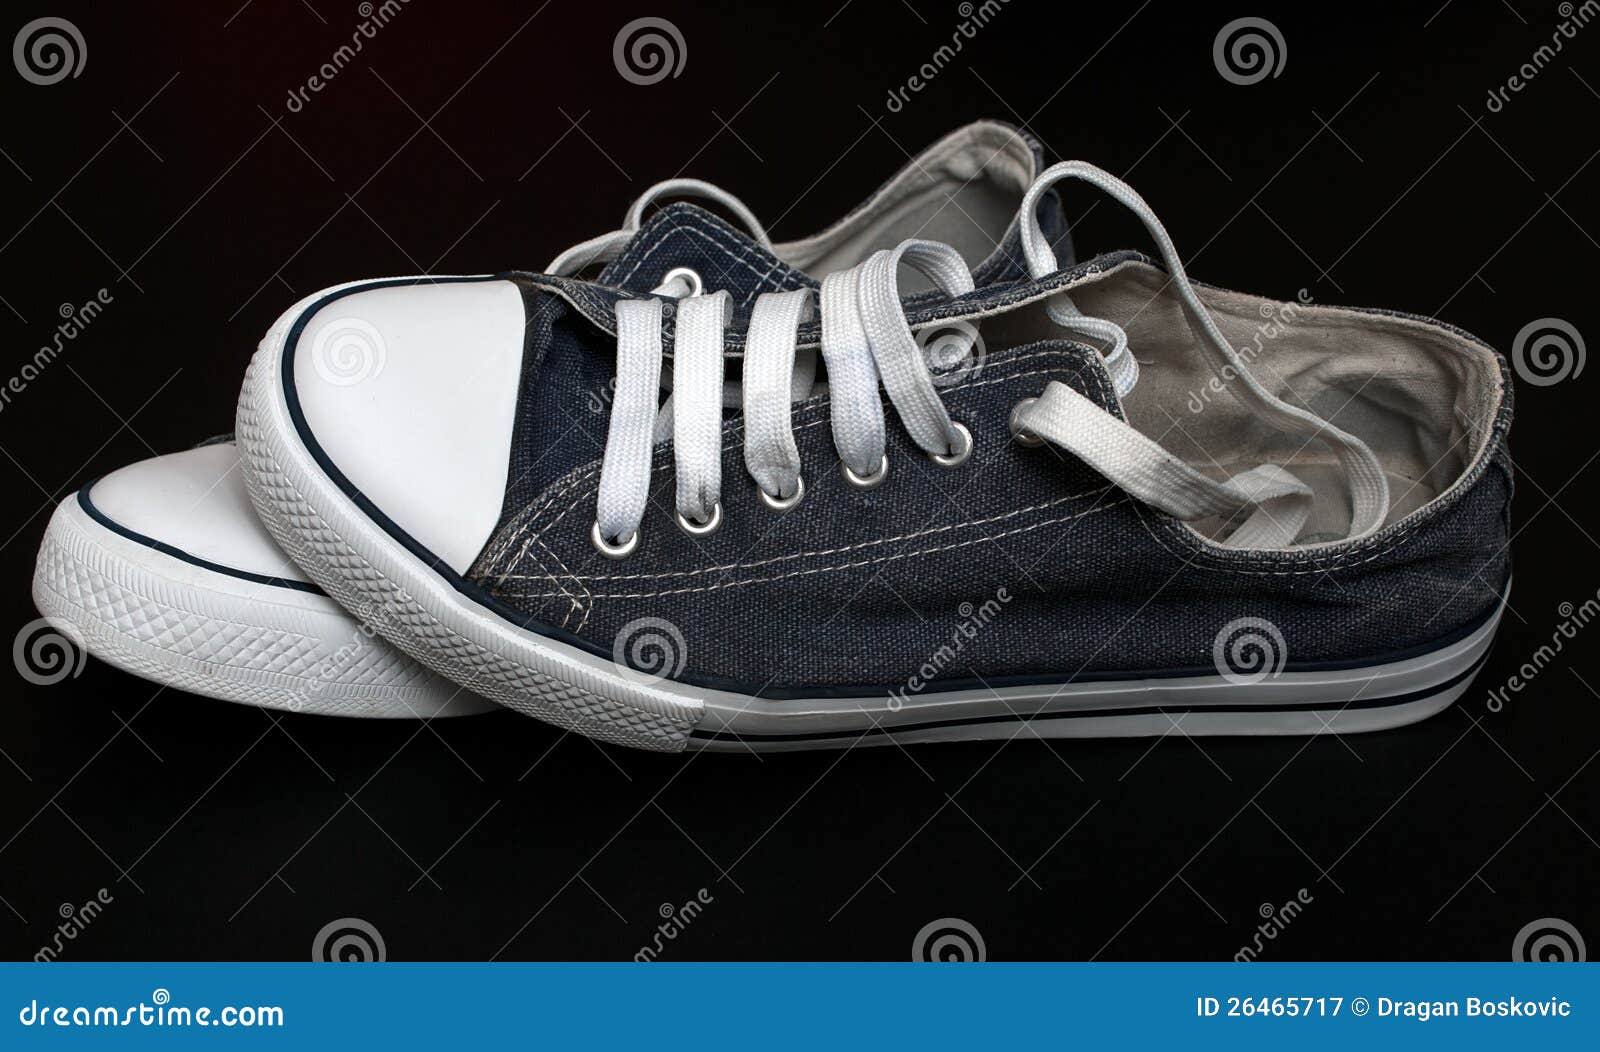 Vintage sneakers stock image. Image of youth, view, knot - 26465717